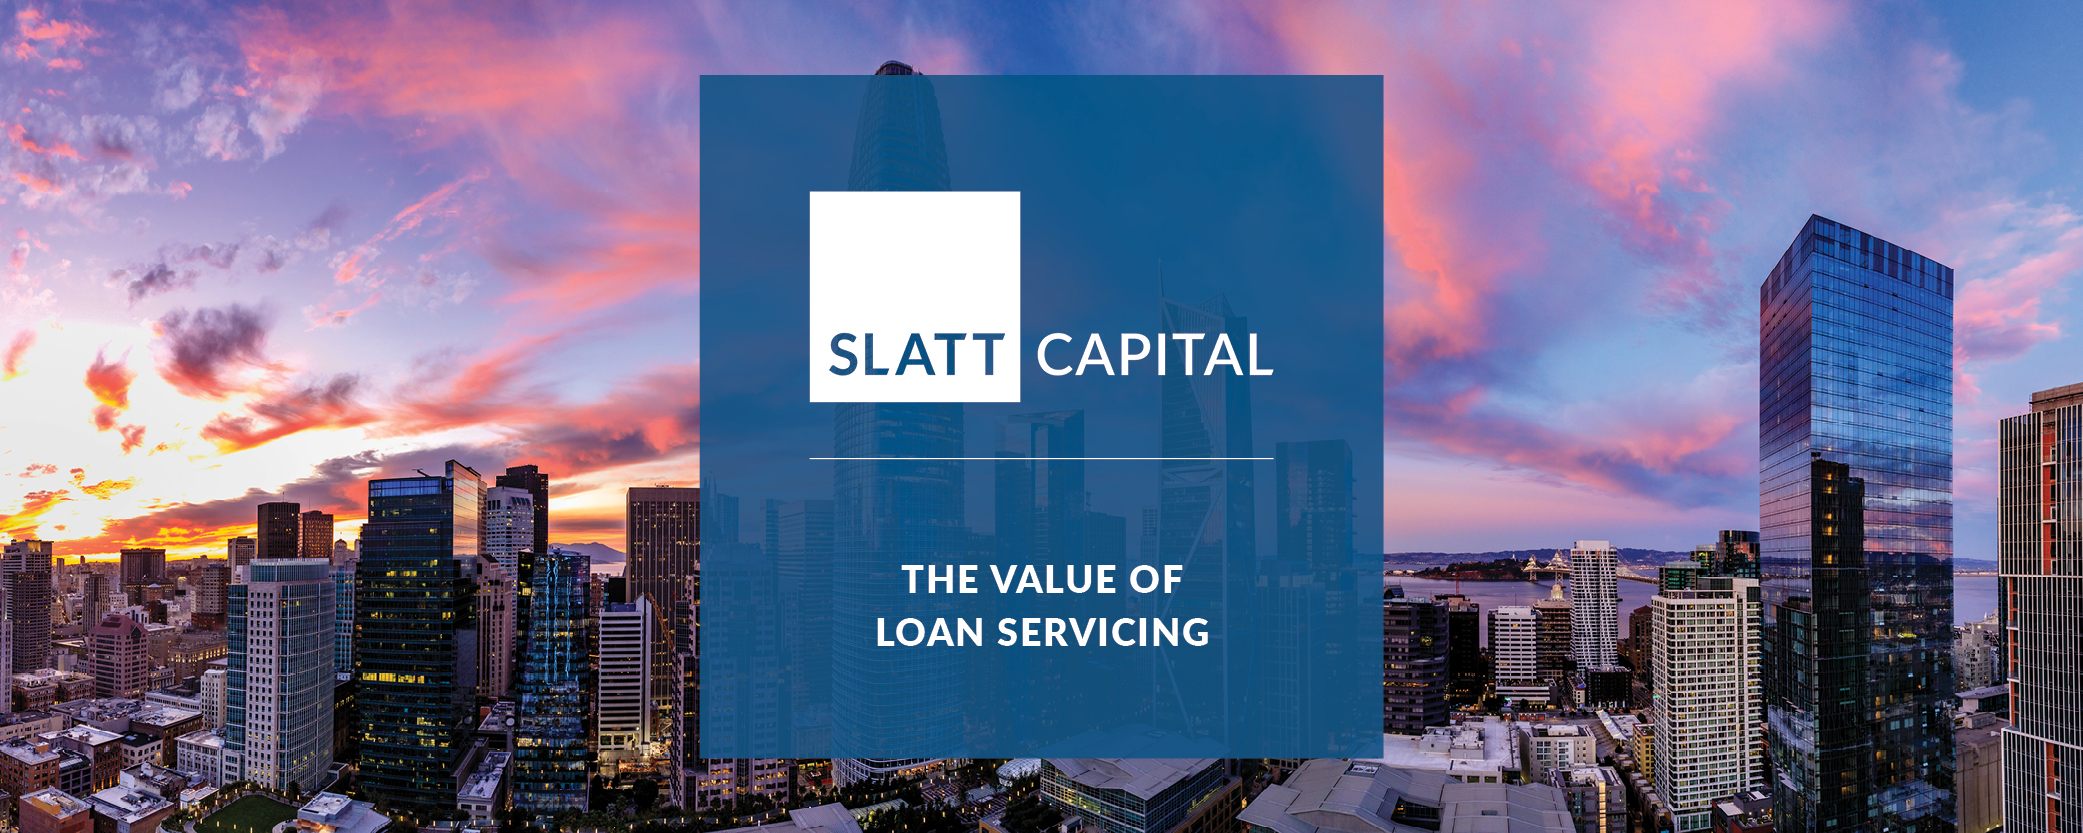 The value of loan servicing